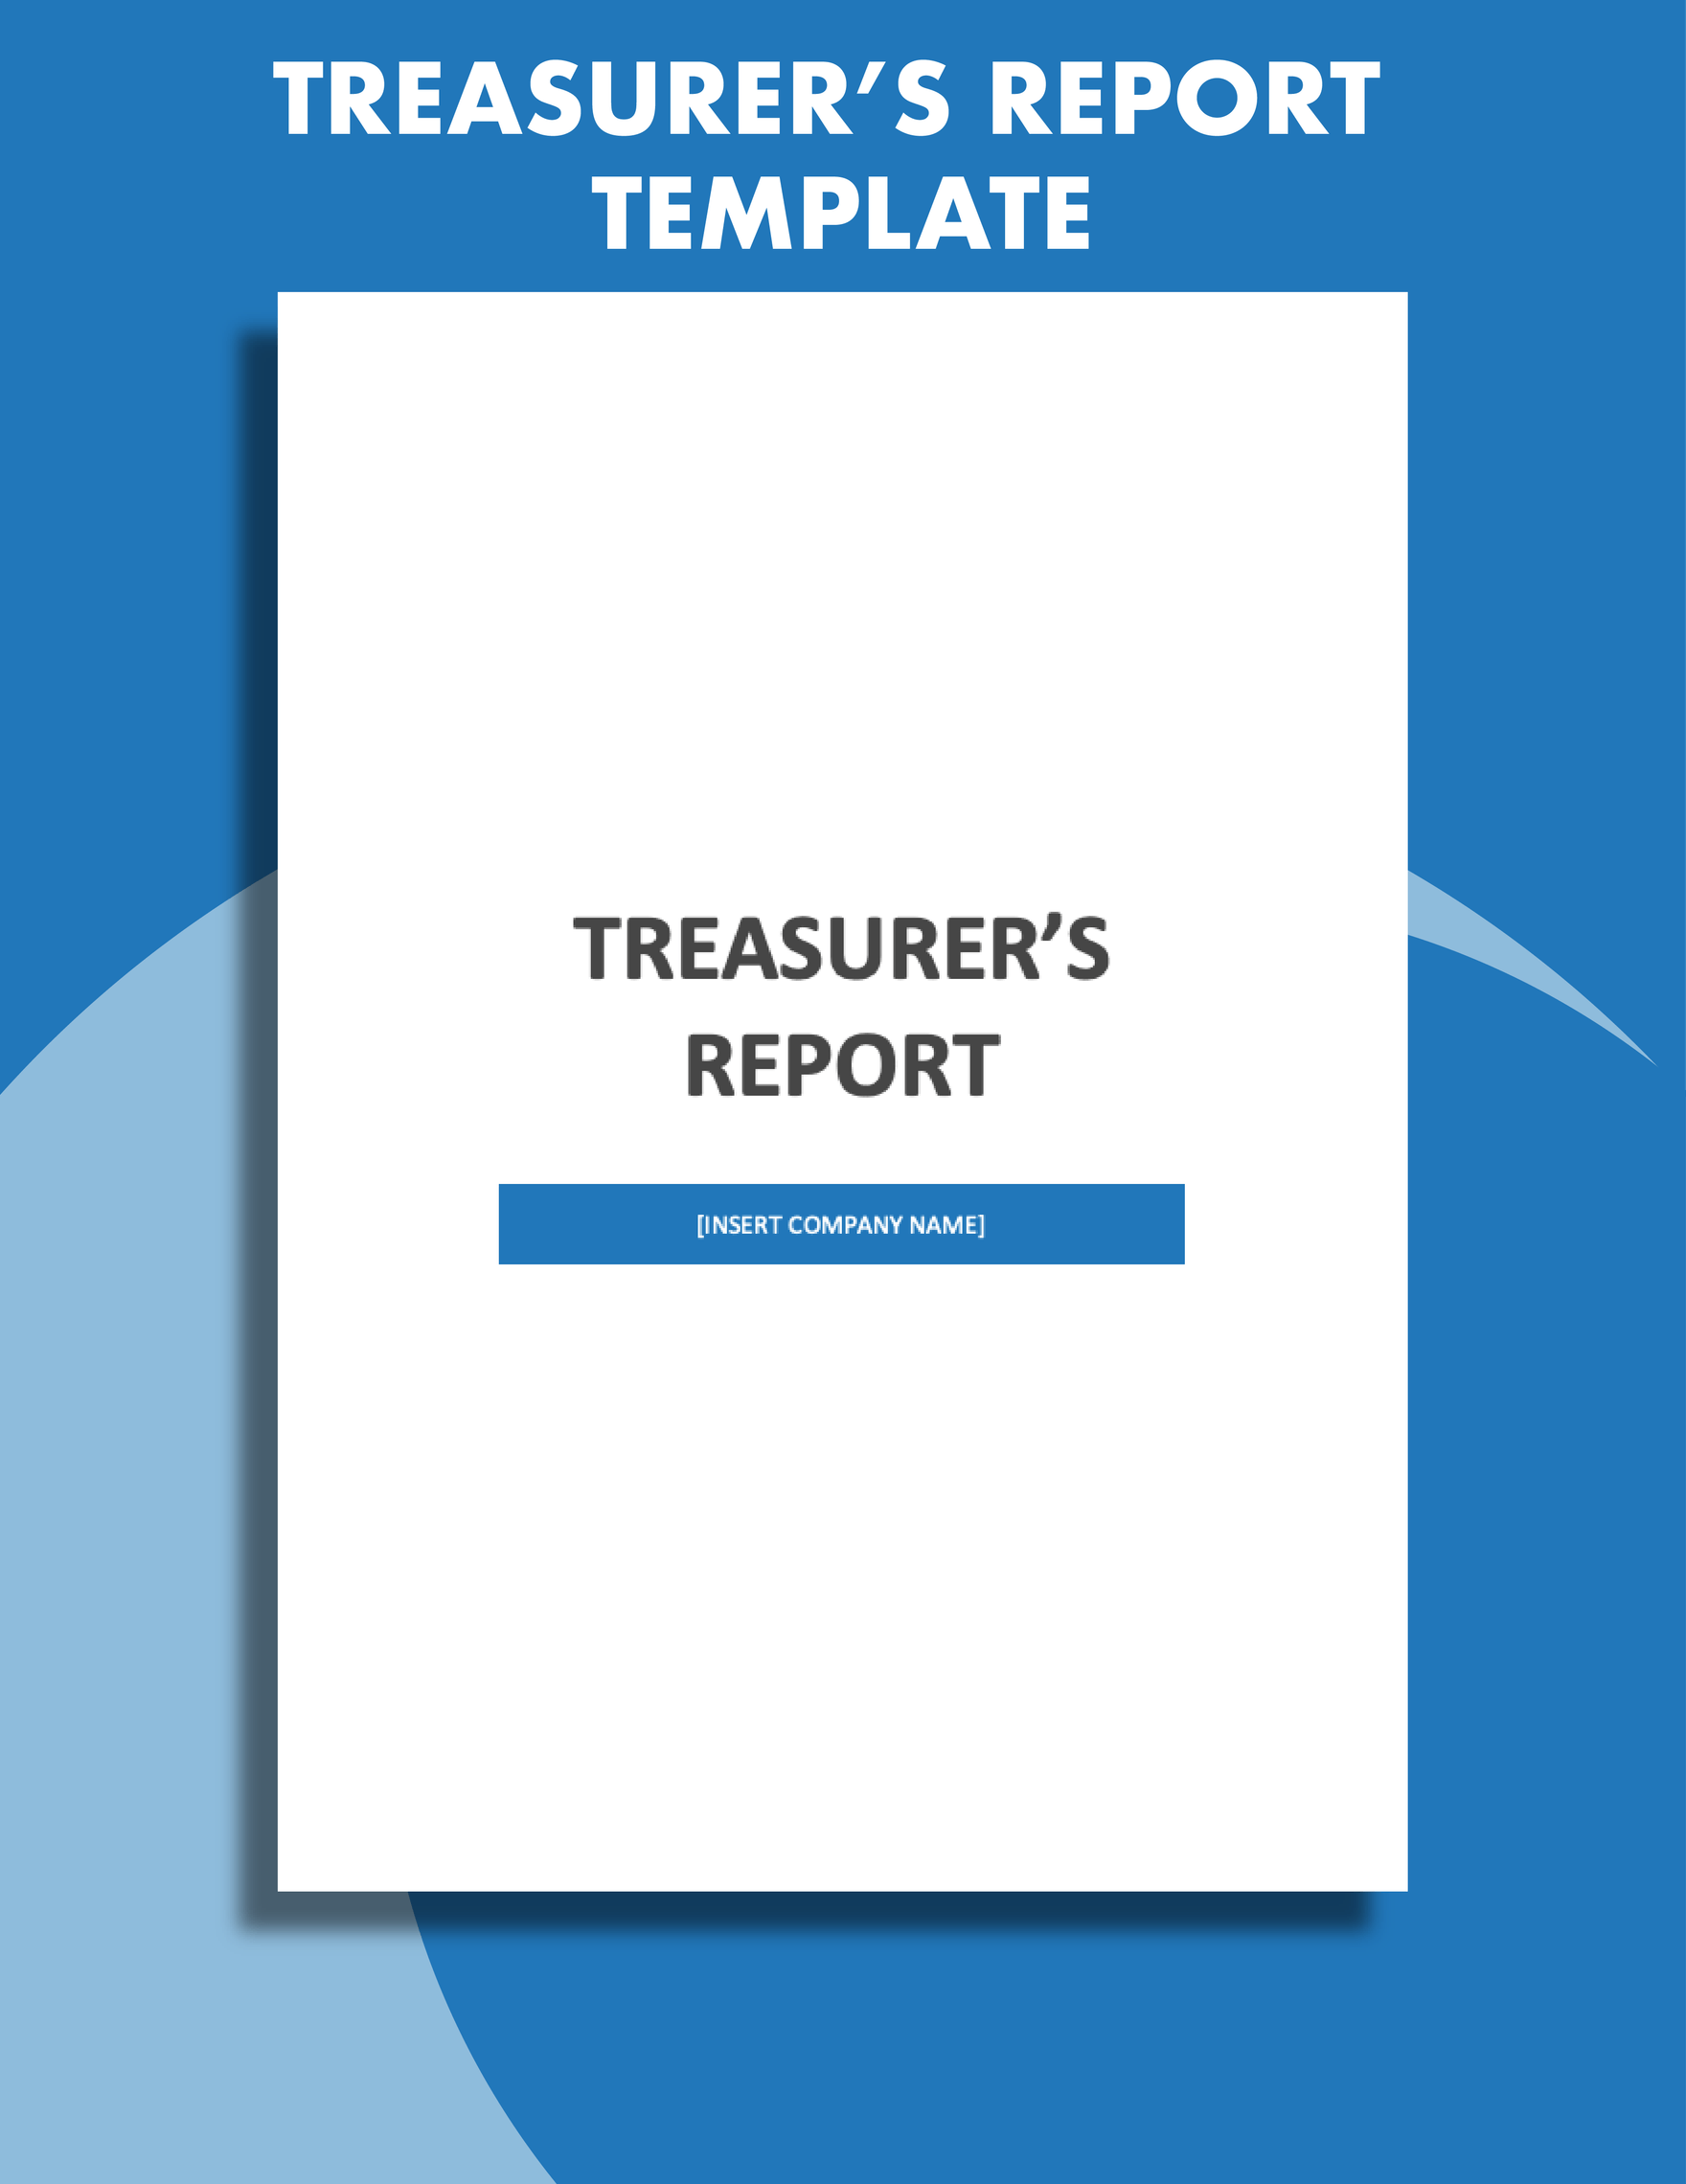 Treasurer Report Template in Word, Google Docs, Apple Pages